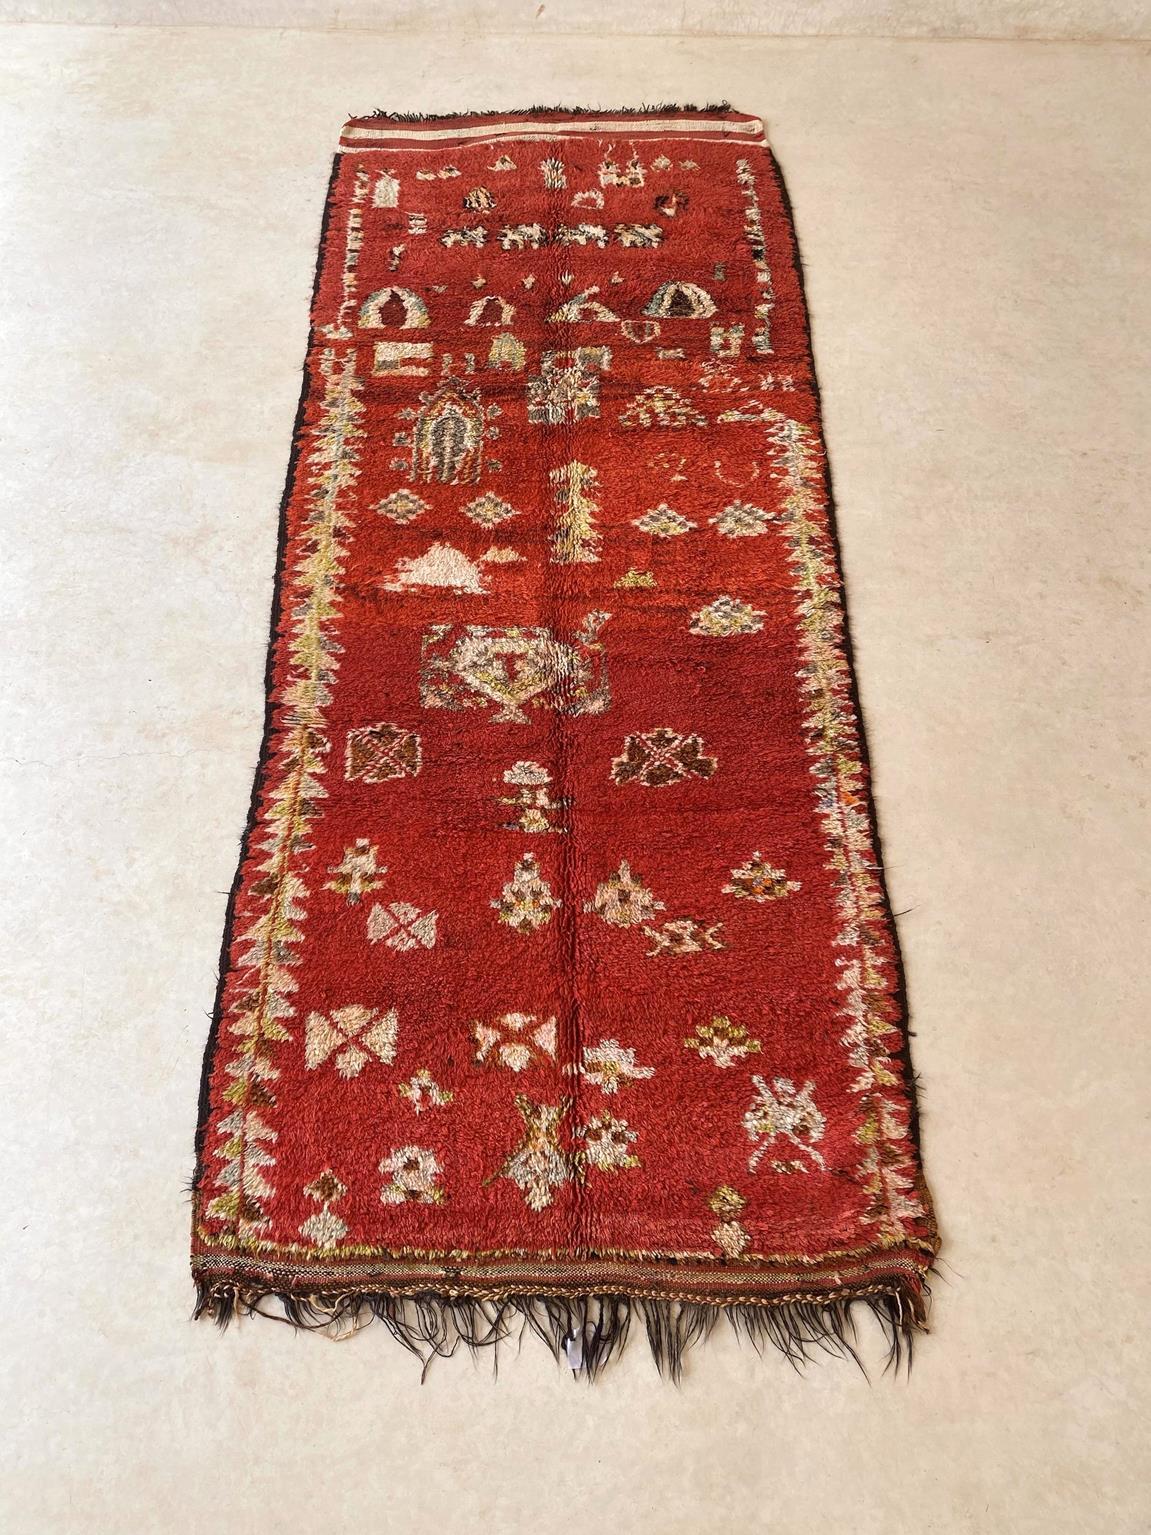 Here is one very beautiful, unique vintage rug, probably from the Rehamna tribe. The background is a deep red with yellow green, brownish, gray and cream designs like diamonds, crosses and scales and others that are open to interpretations. It shows